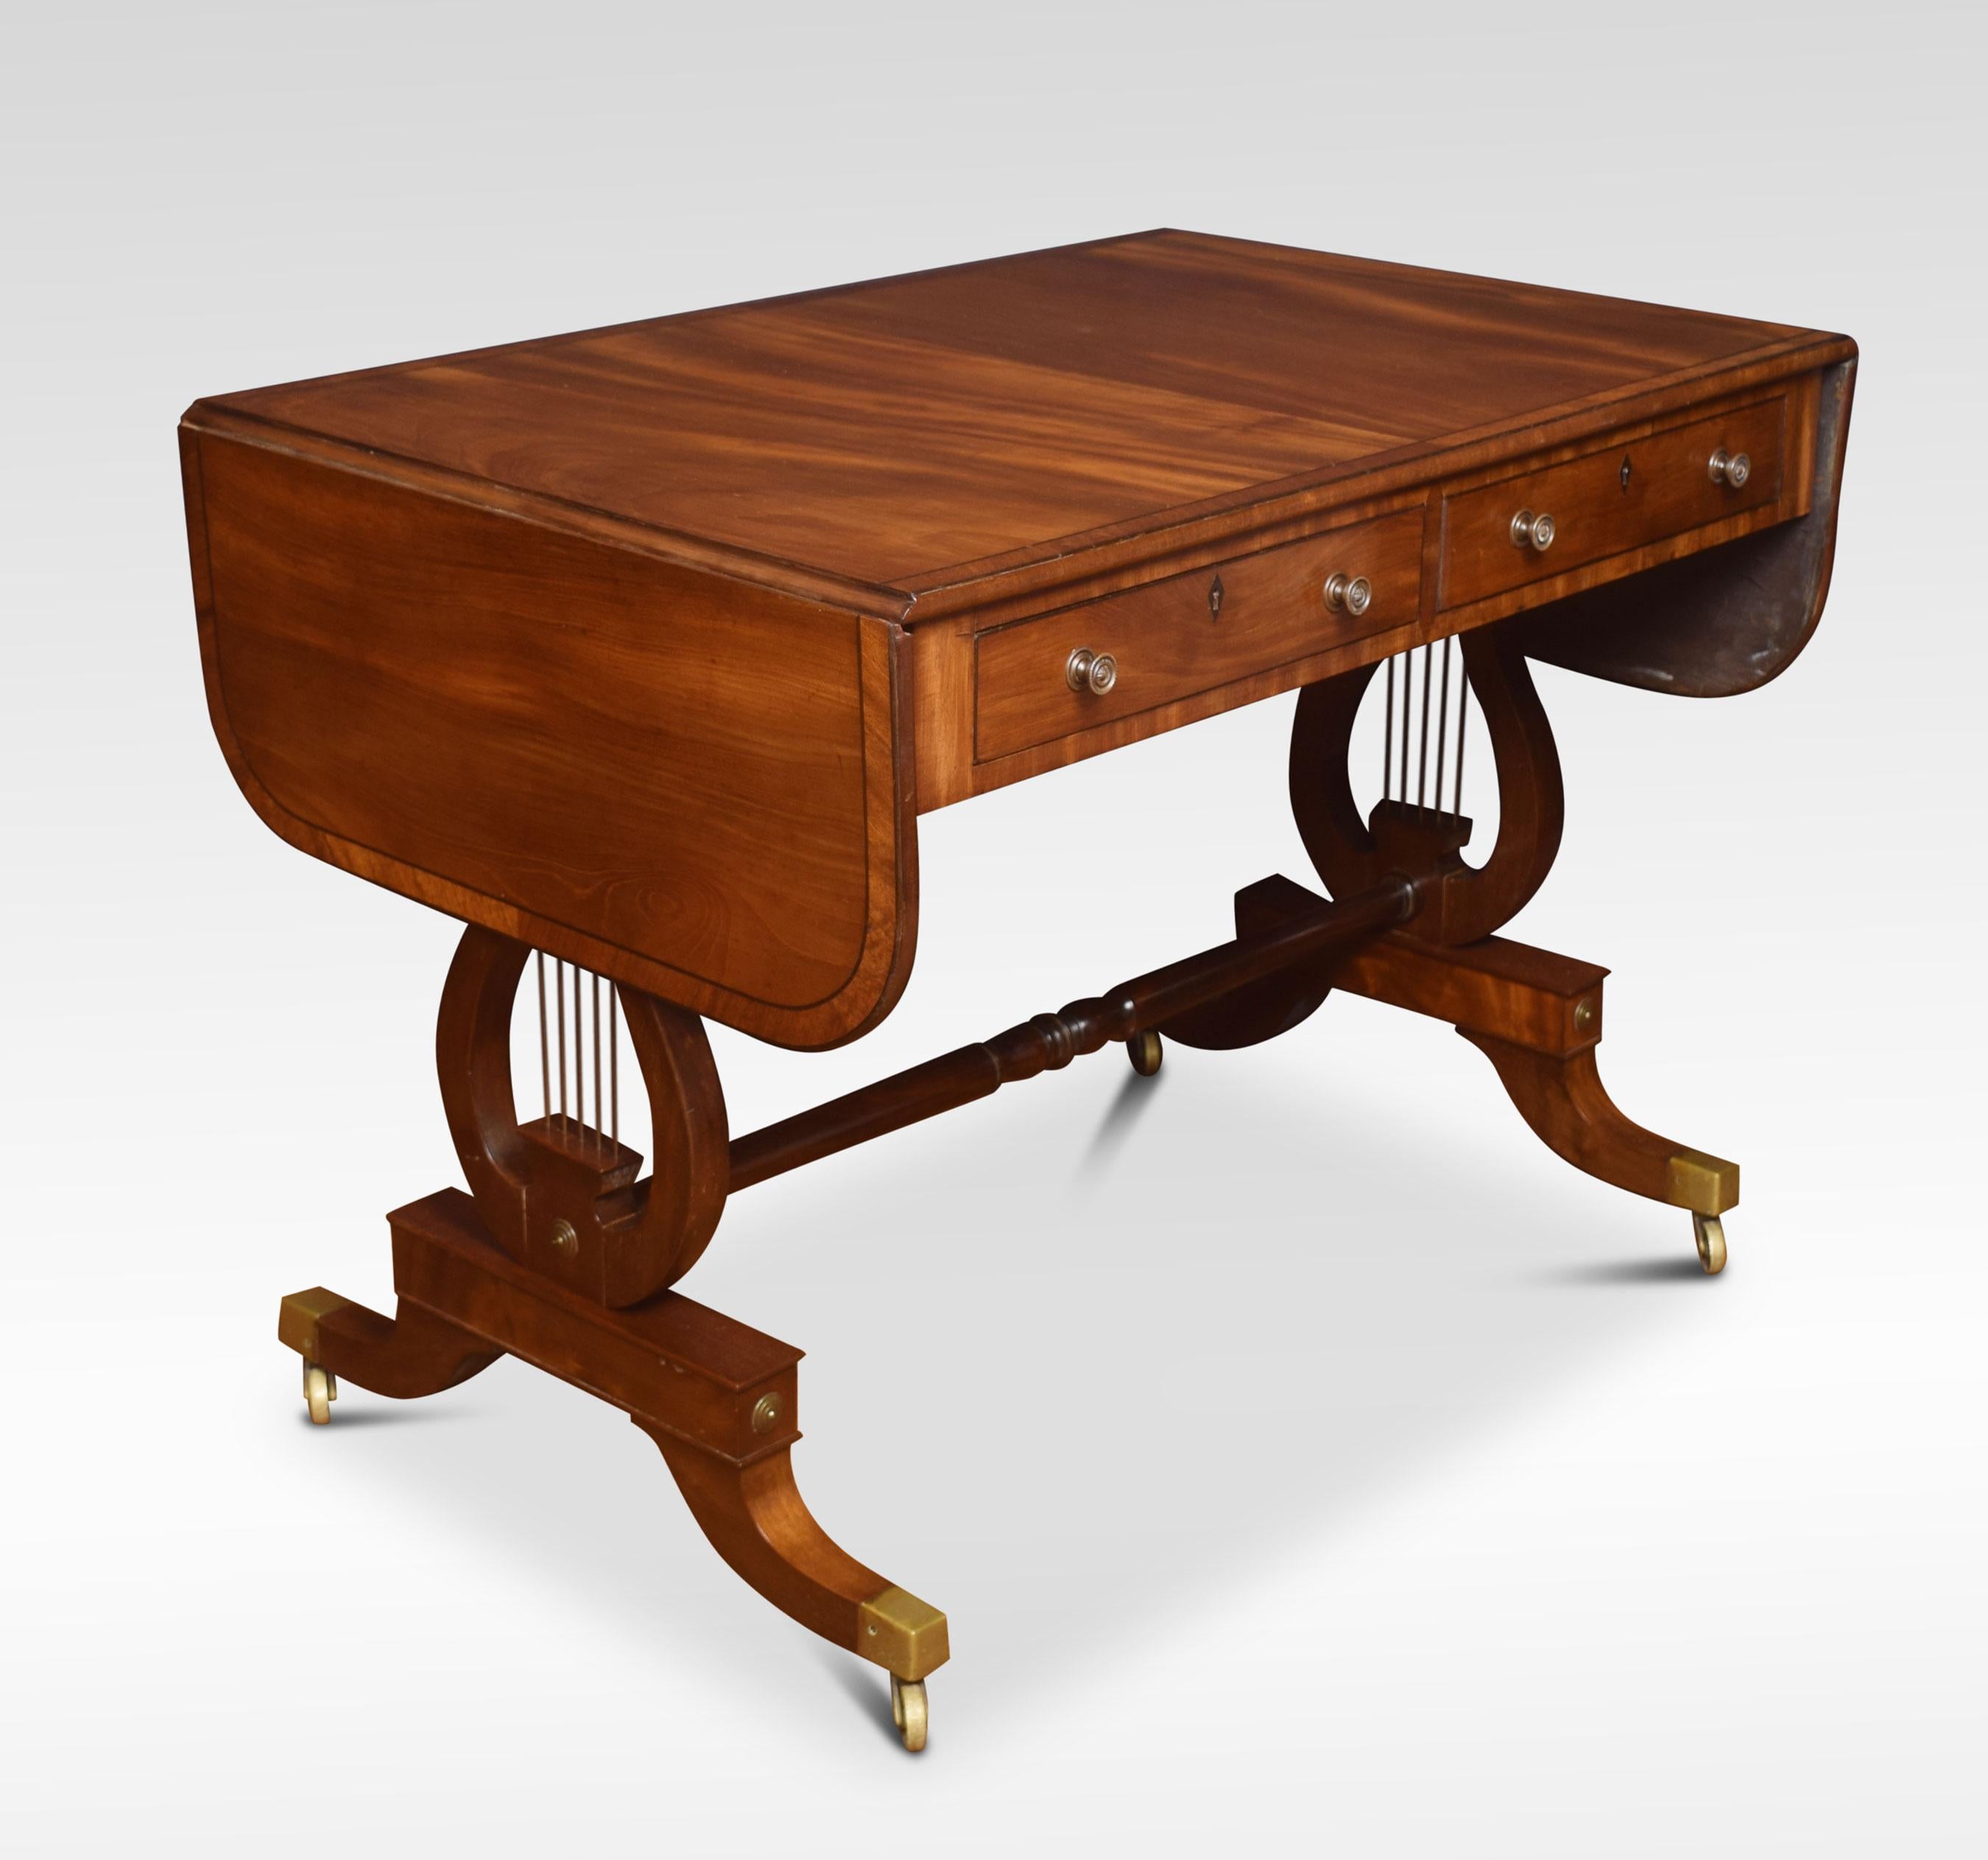 Late 19th century mahogany sofa table, the rectangular top with rounded corners, and two drop leaves having crossbanded detail. Above two freeze drawers the opposing side having faux drawers. All raised up on a pair of lyre ends united by stretcher